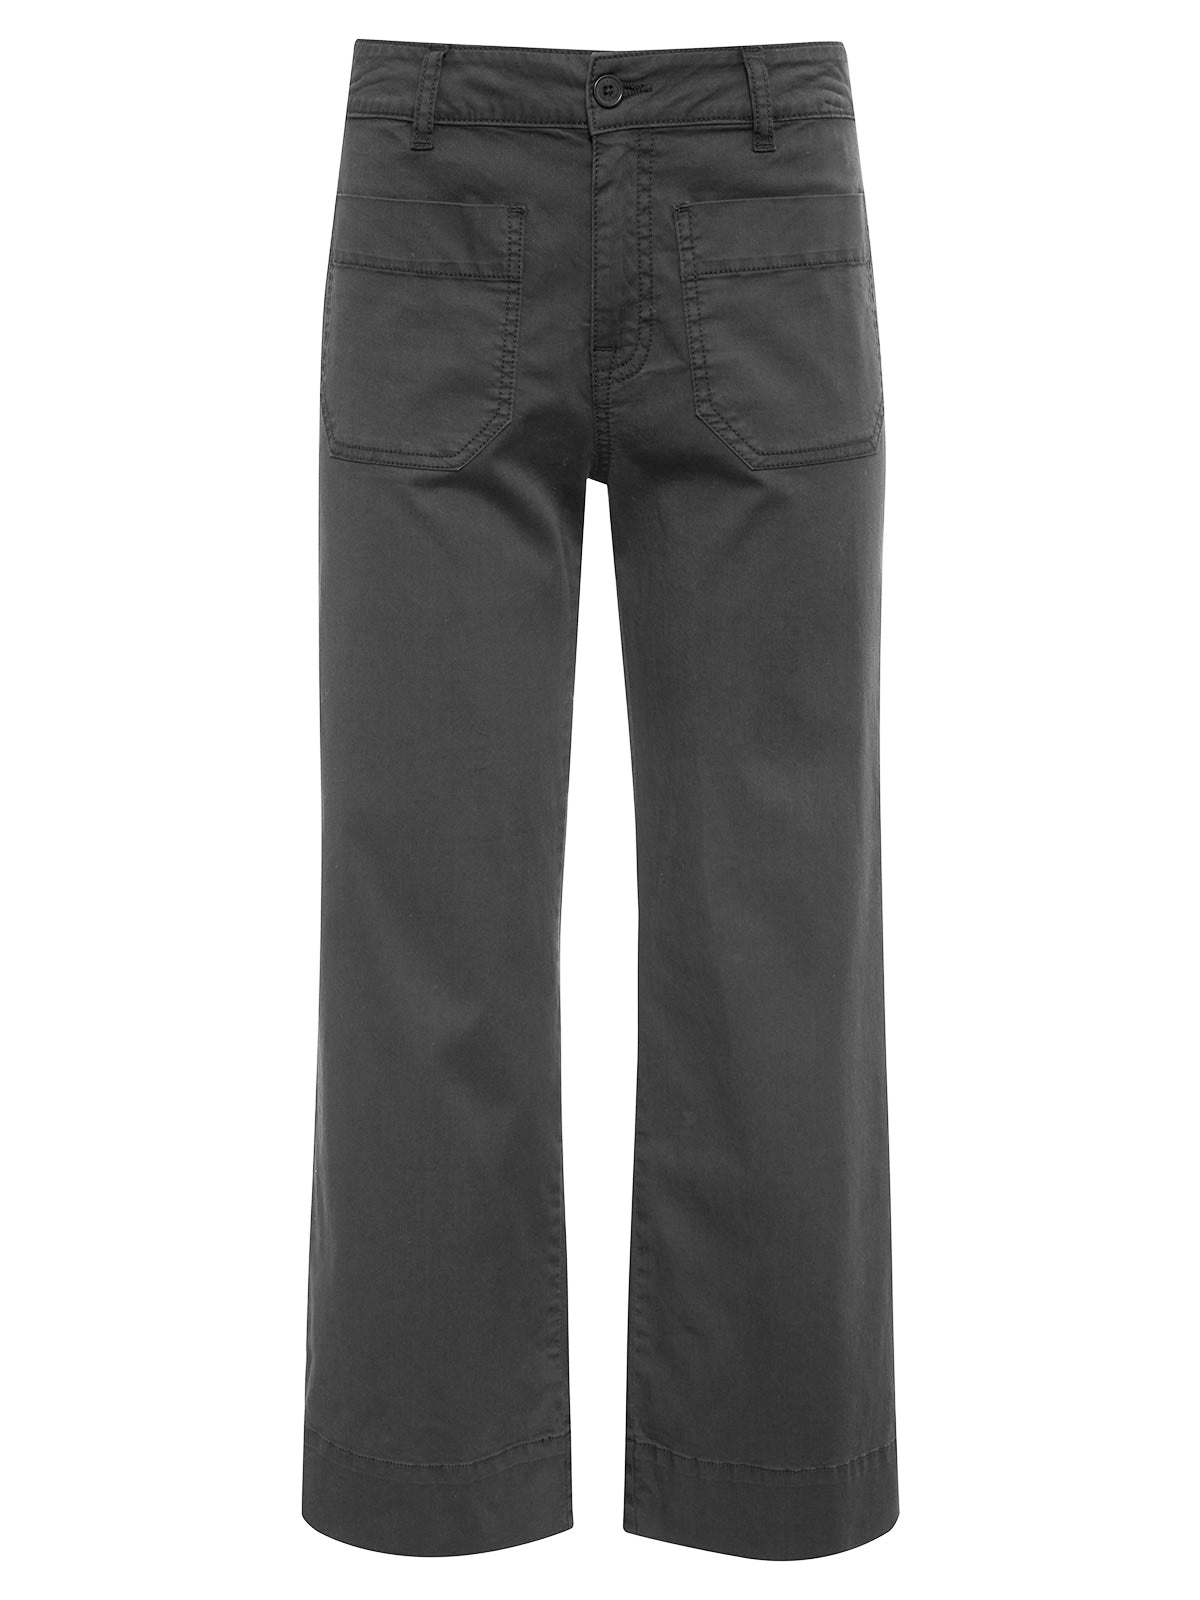 The Marine Standard Rise Crop Pant Obsidian